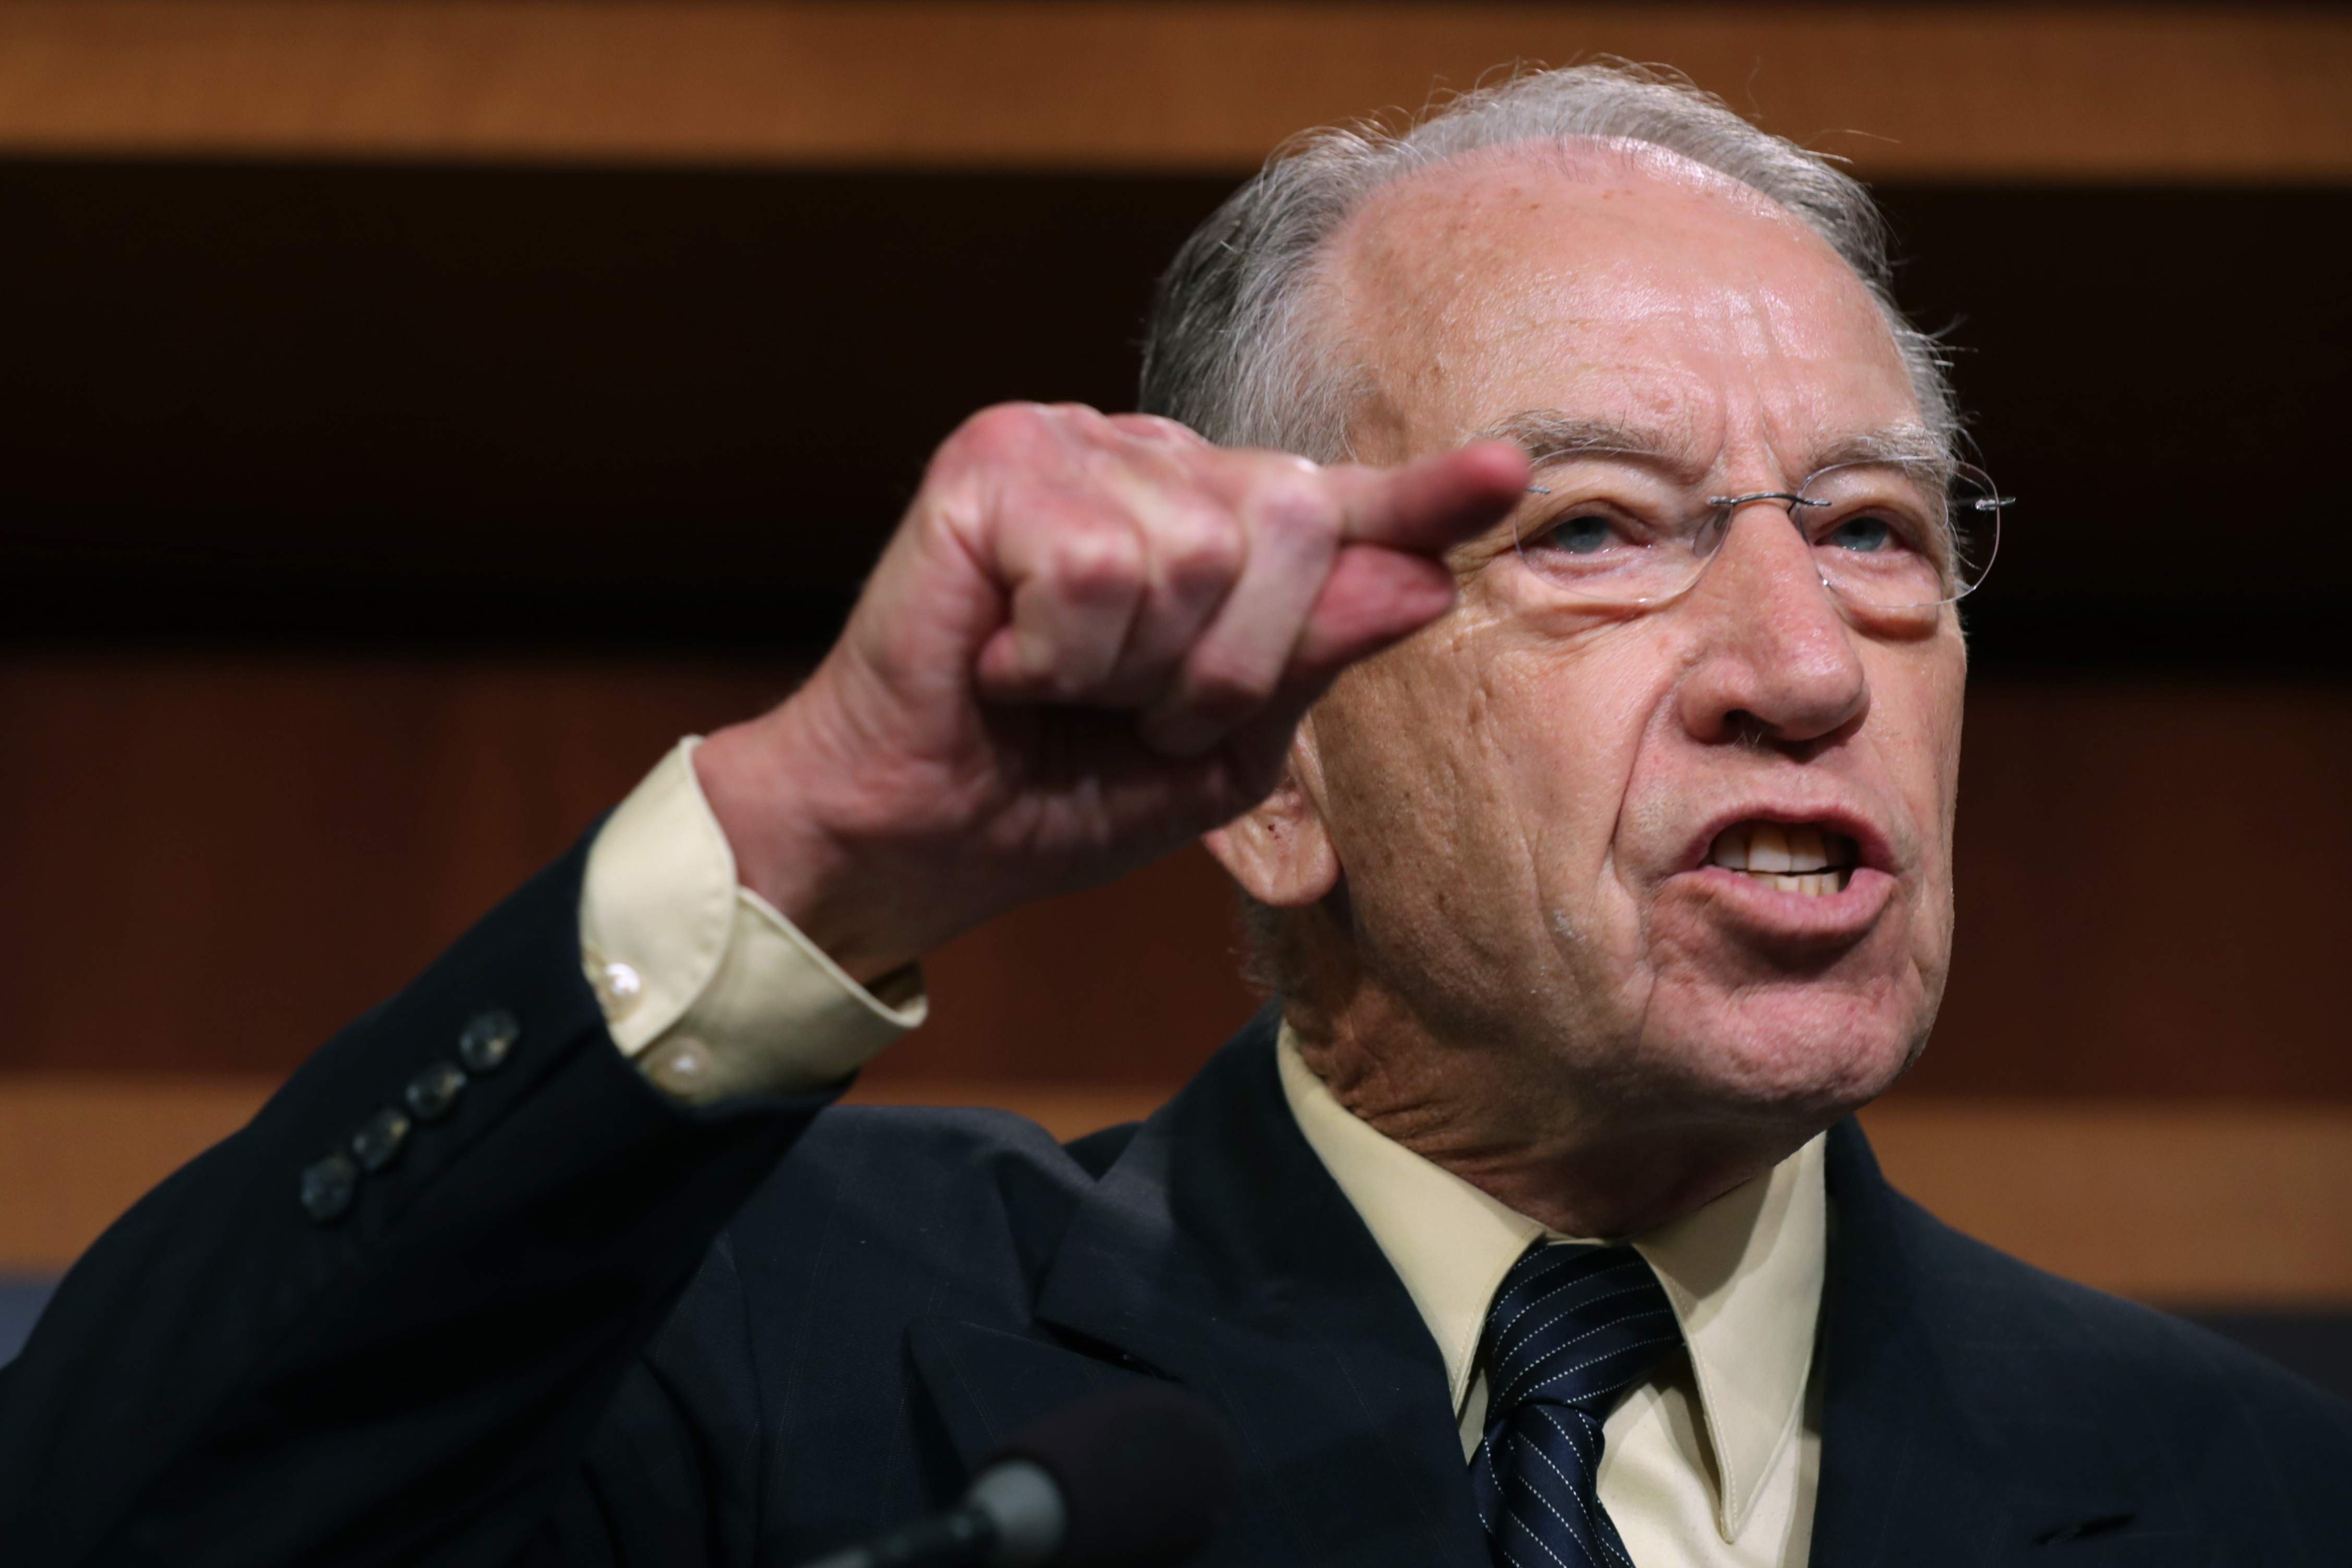 WASHINGTON, DC - OCTOBER 04: Senate Judiciary Committee Chairman Charles Grassley (R-IA) speaks during a news conference to discuss this week’s FBI investigation into Supreme Court nominee Judge Brett Kavanaugh at the U.S. Capitol October 04, 2018 in Washington, DC. Calling Dr. Christine Blasey Ford’s allegations of sexual assault by Kavanaugh “outrageous,” GOP senators hope to move forward with a confirmation vote this weekend. (Photo by Chip Somodevilla/Getty Images)